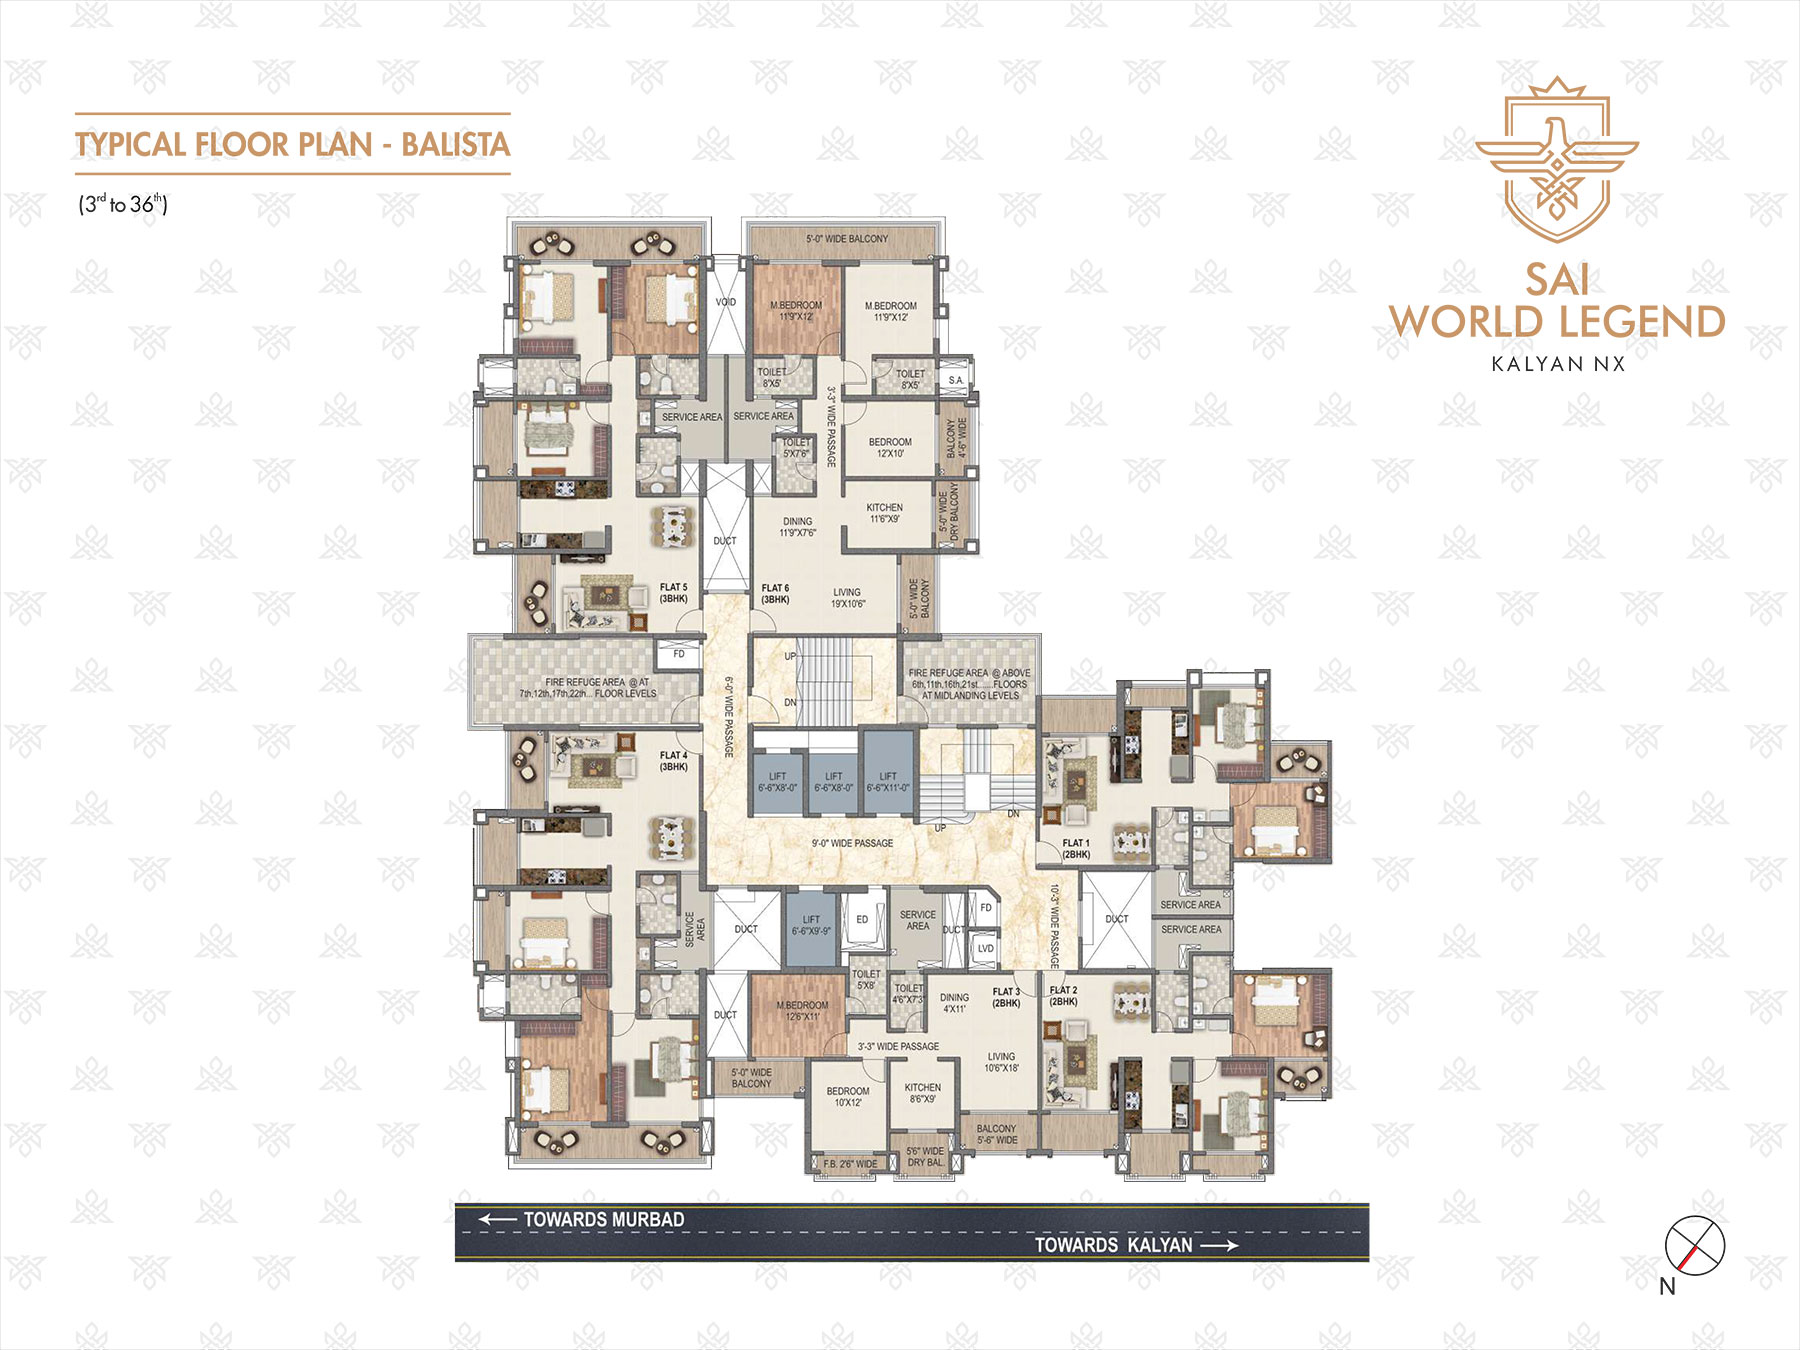 TYPICAL FLOOR PLAN BALISTA 3rd to 36th